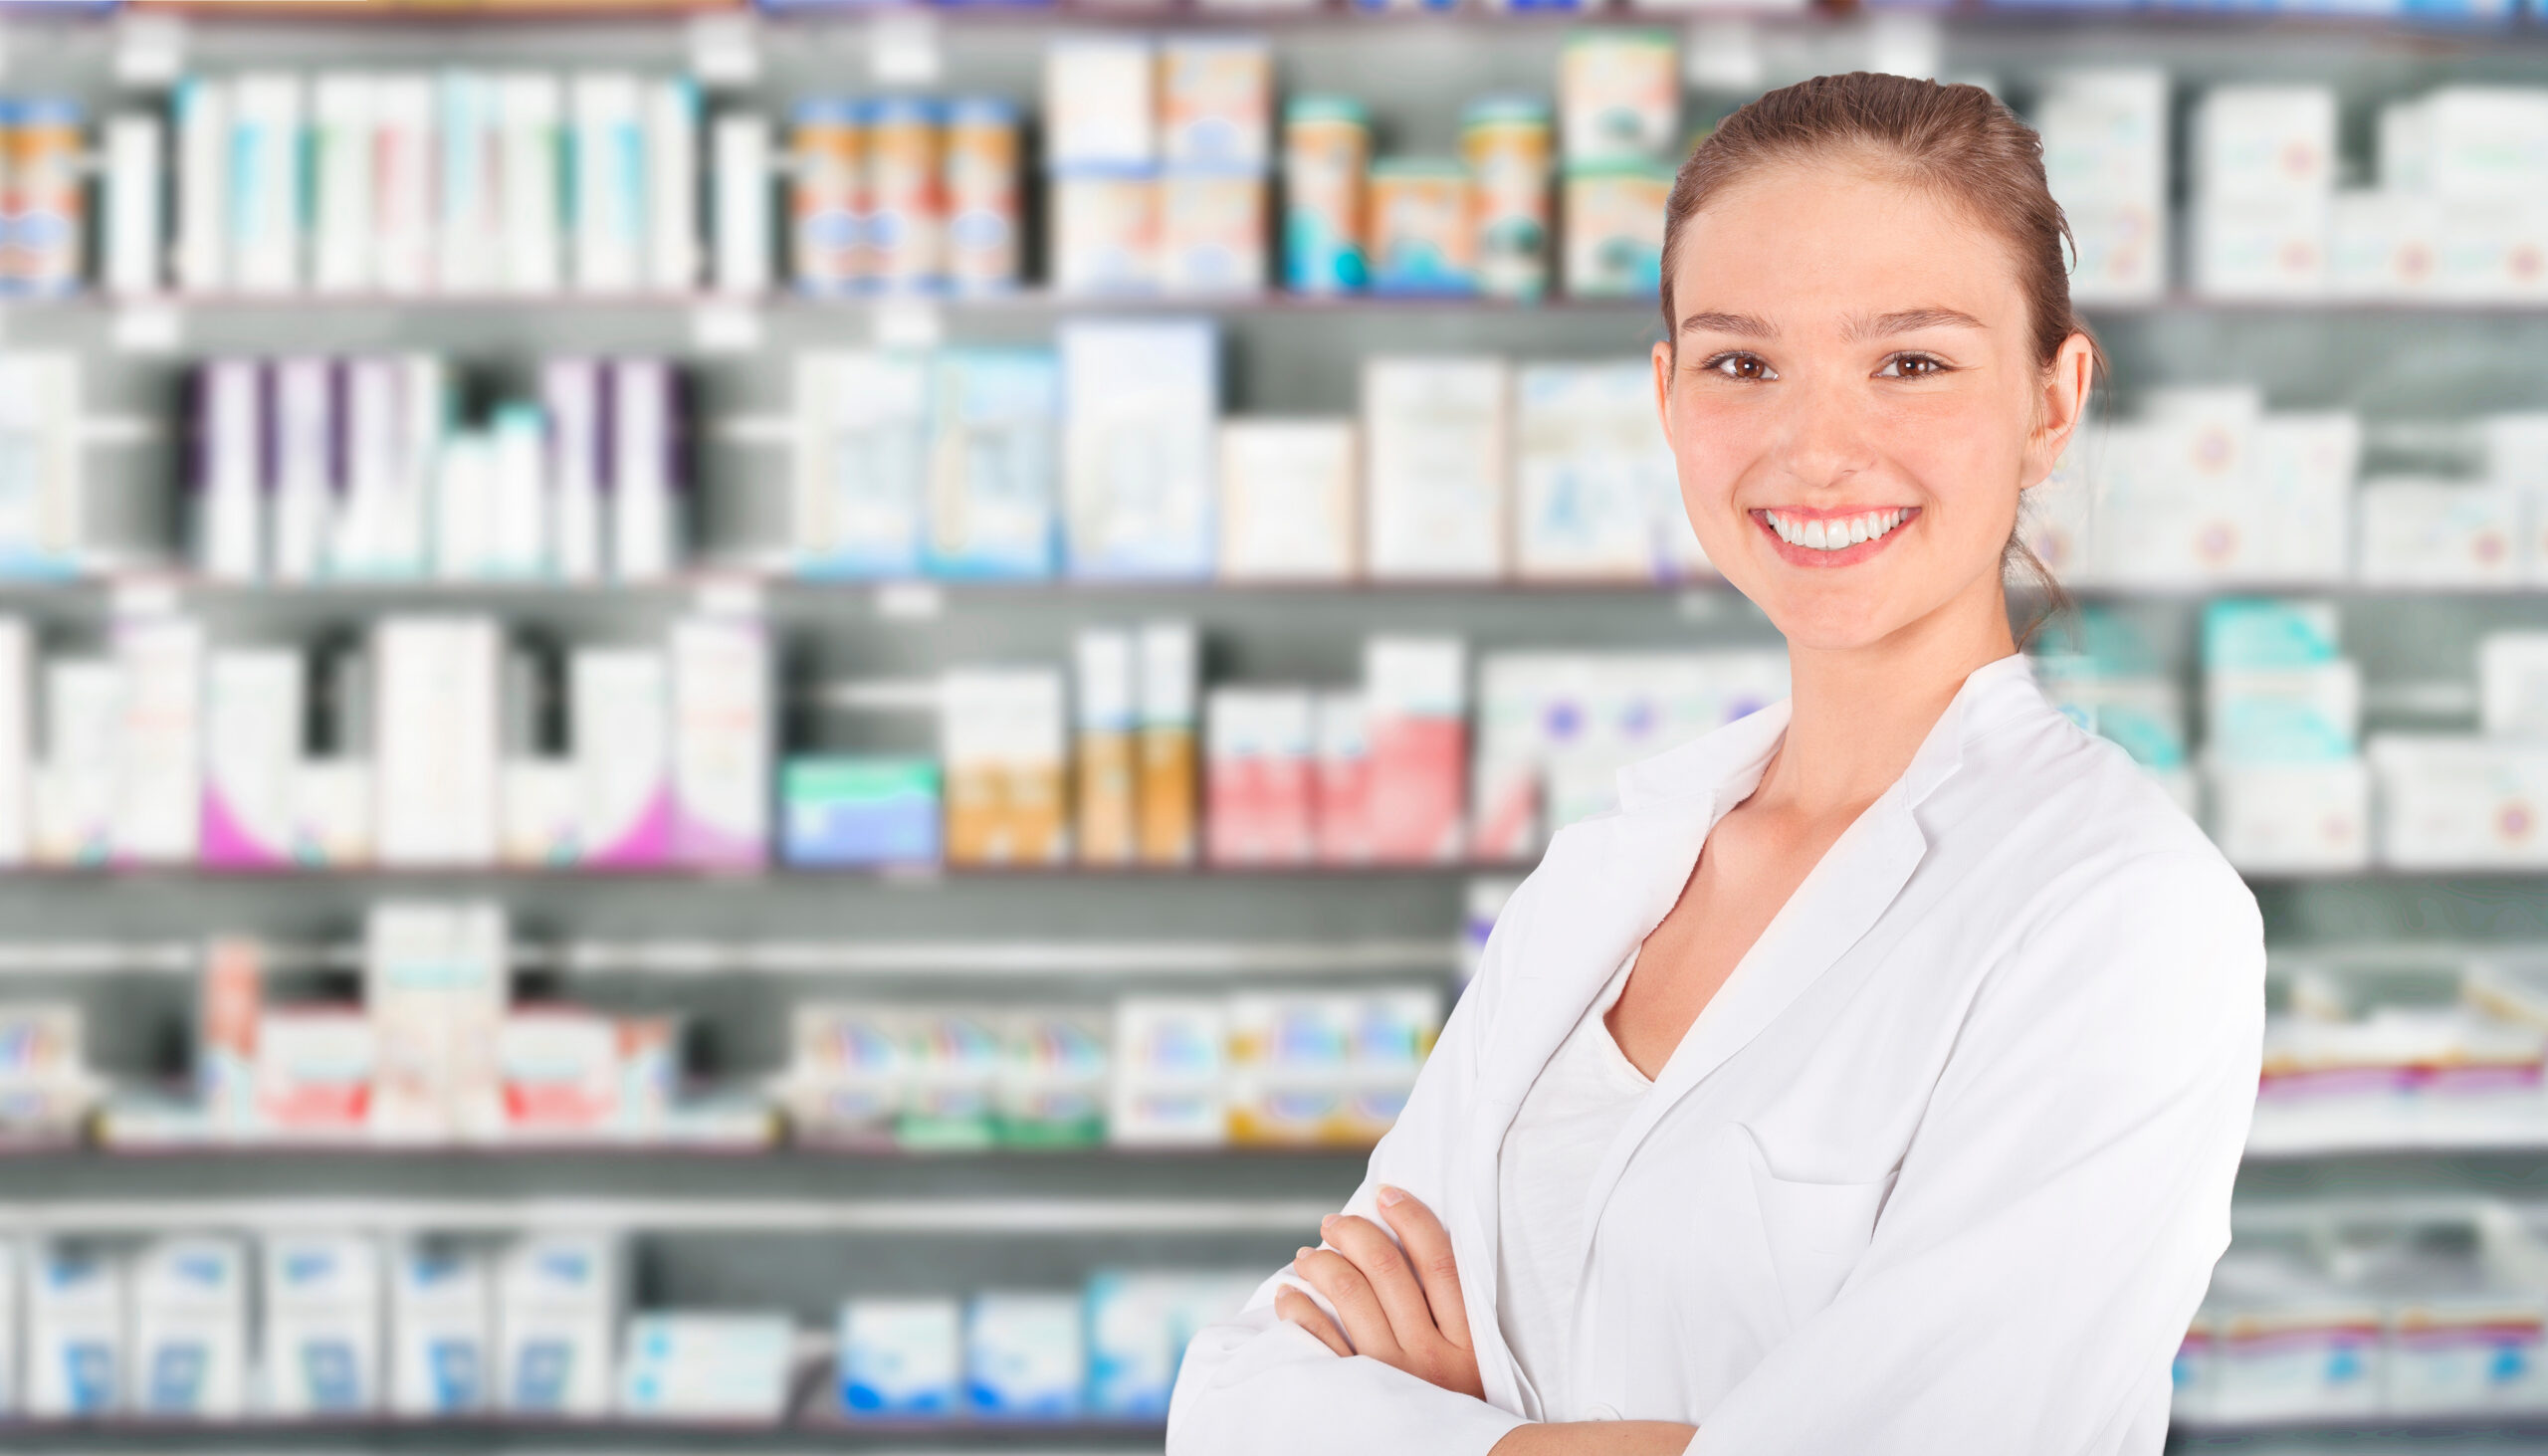 Between Medicine and Patient: The Pharmacy as a Bridge to Health